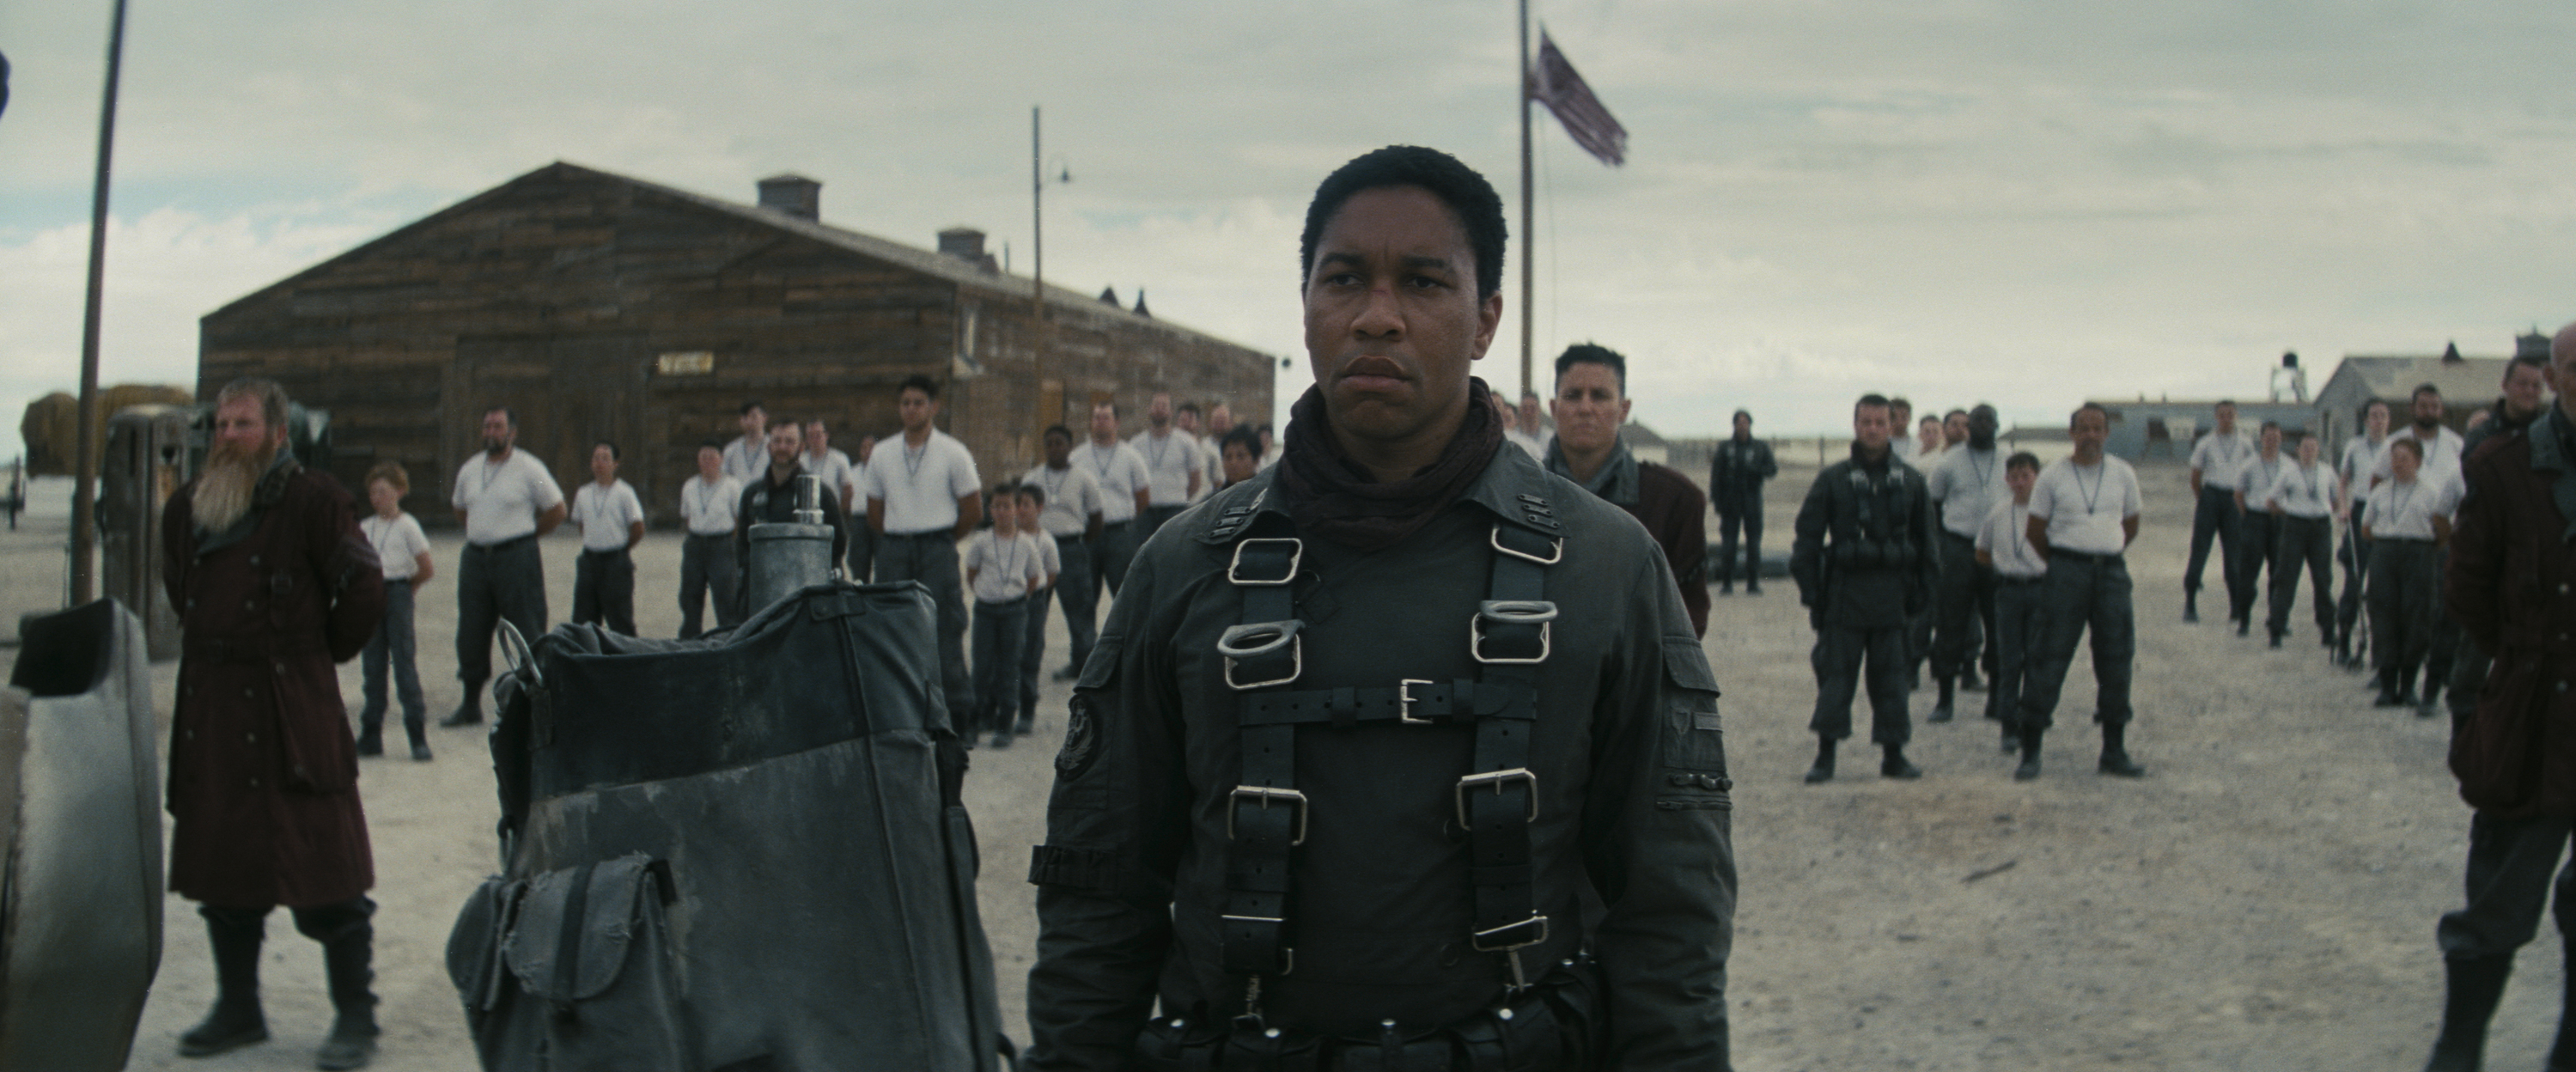 maximus (aaron moten) stands among a field of soldiers on a military base, in 'fallout'